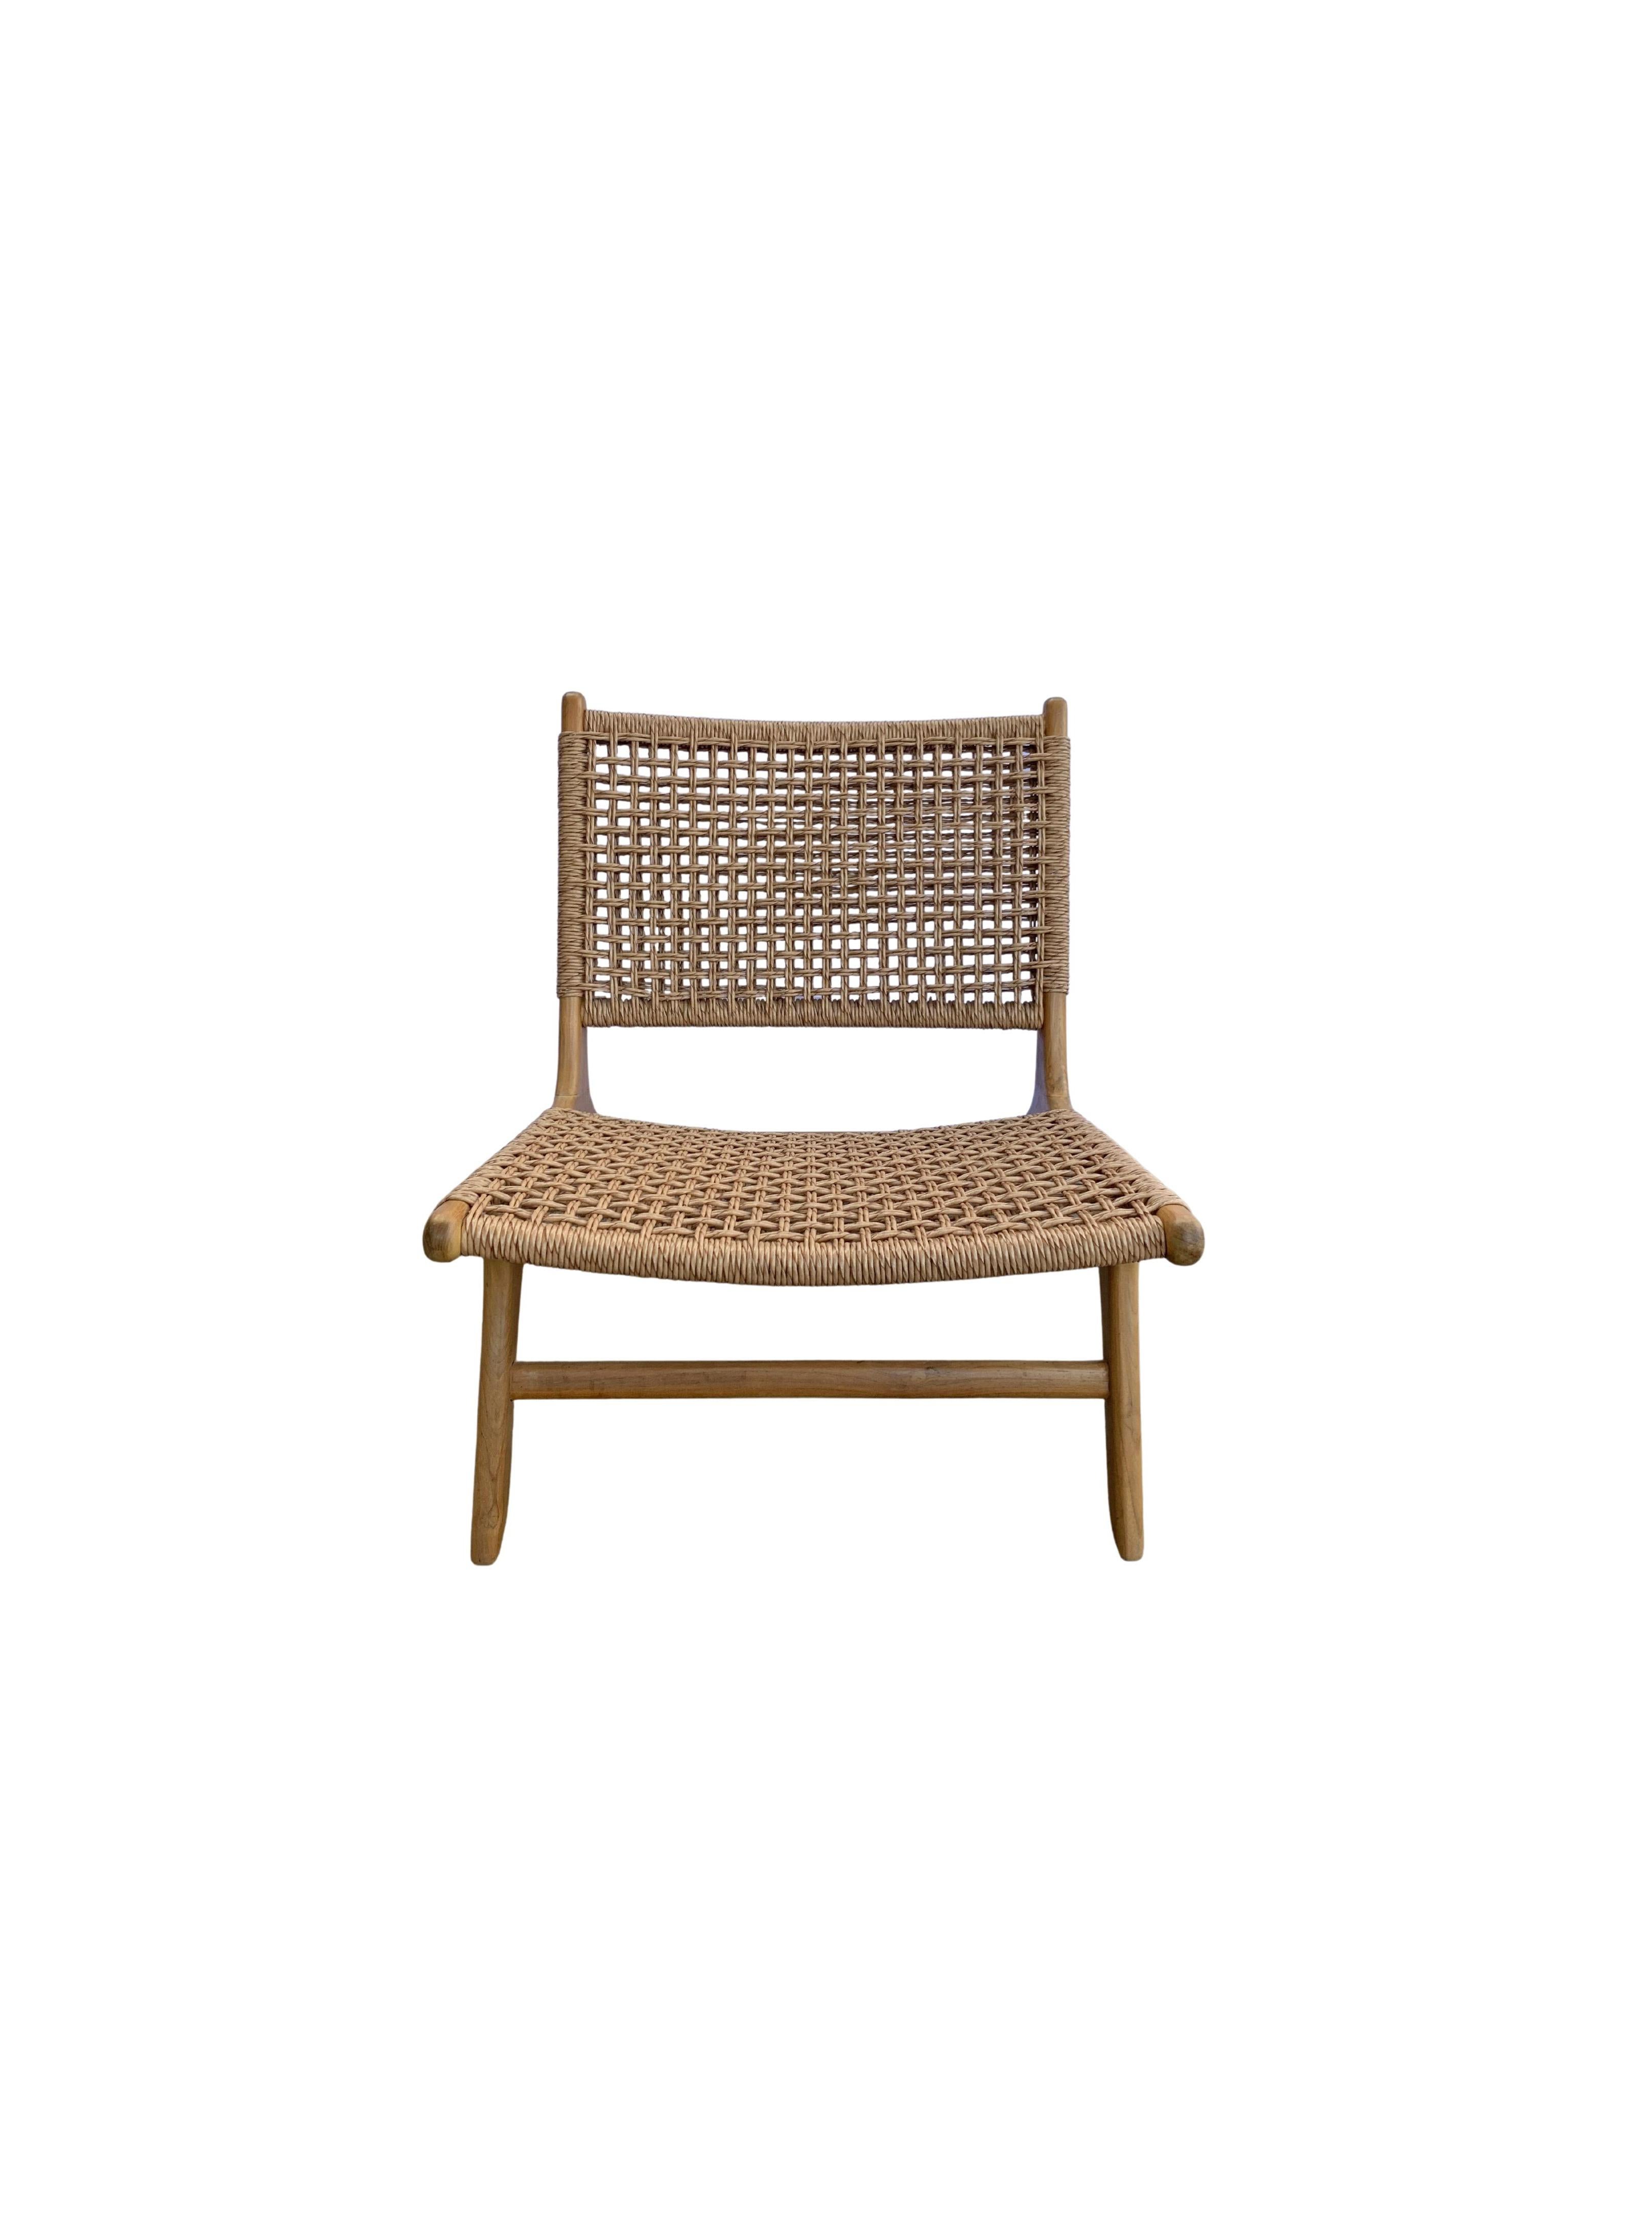 A hand-crafted teak framed & woven synthetic rattan lounger chair. These chairs are crafted by local artisans using a wood joinery technique without the use of nails. They feature a subtle wood texture and are robust and sturdy. Synthetic rattan is